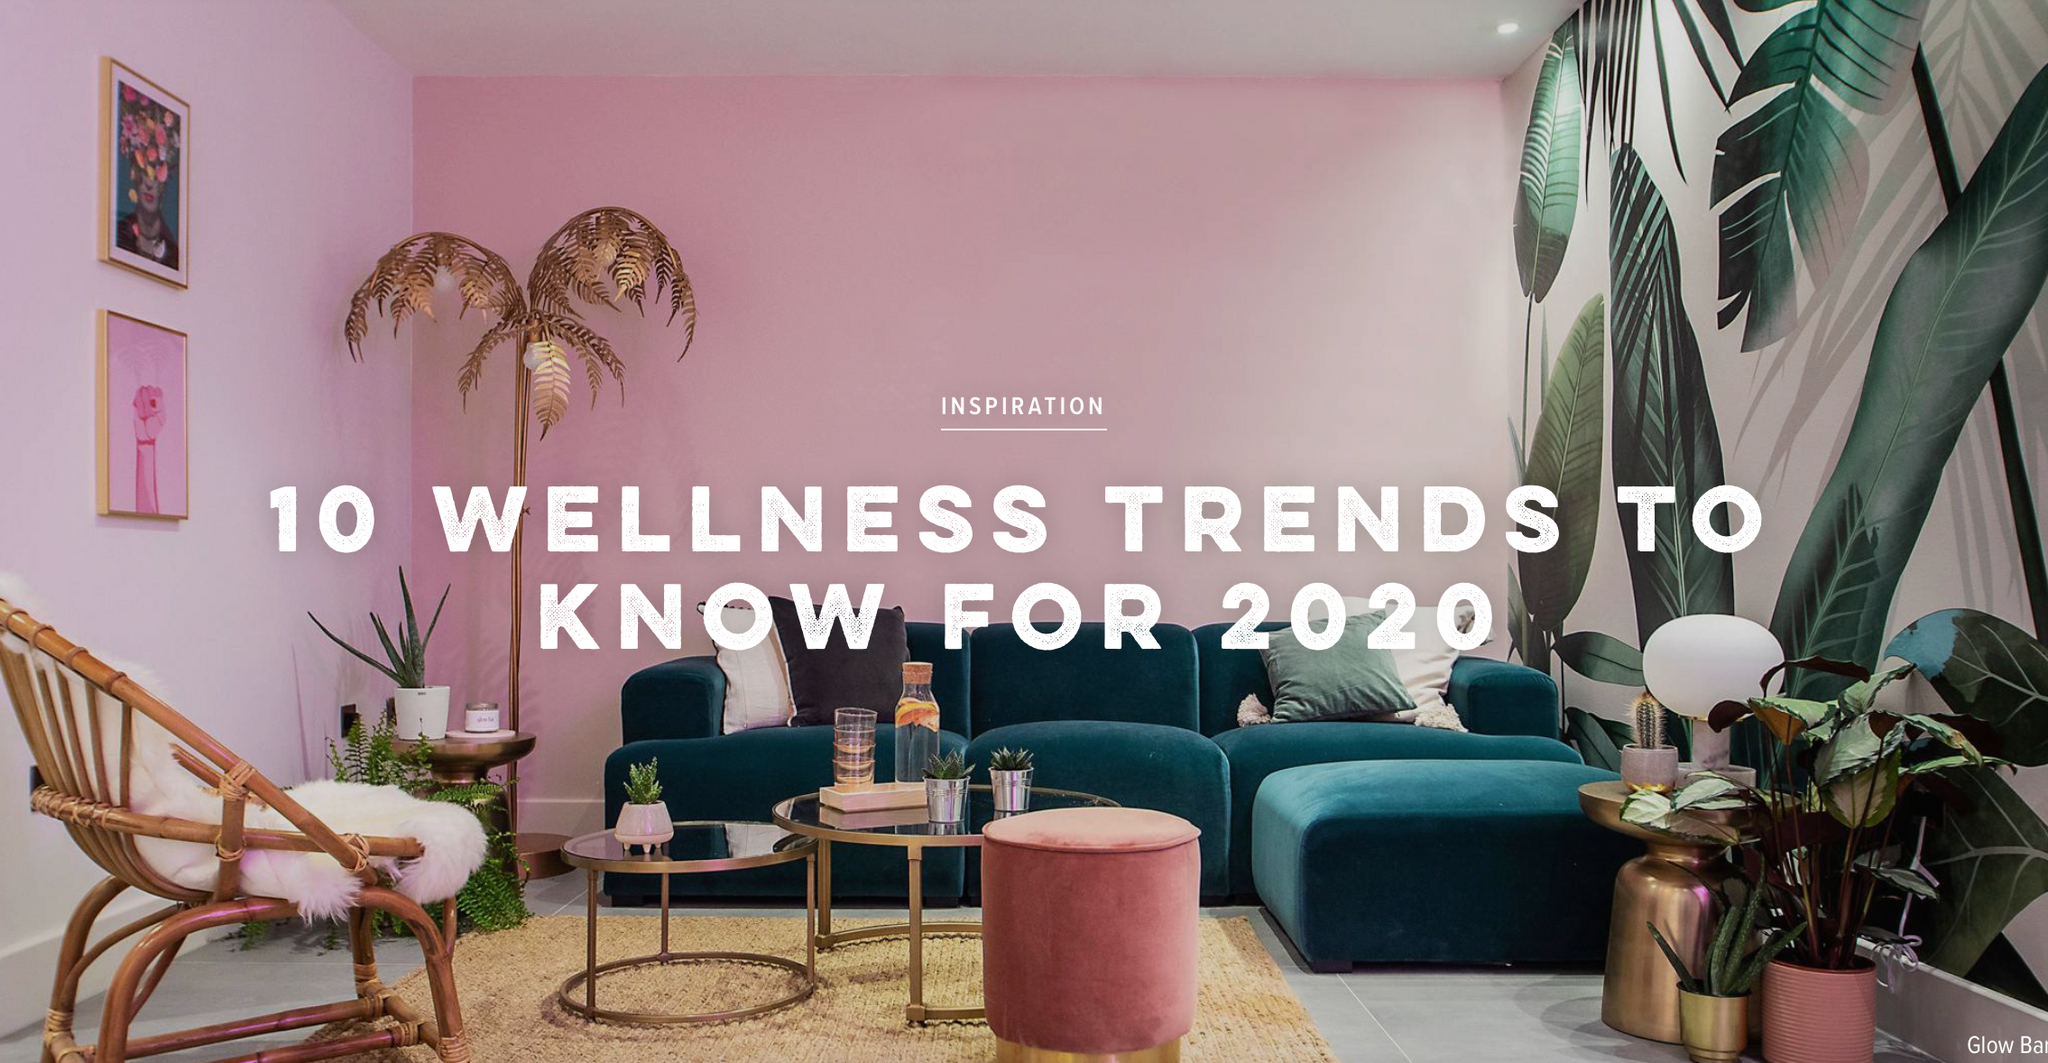 CONDE NASTE TRAVELLER - 10 WELLNESS TRENDS TO KNOW FOR 2020